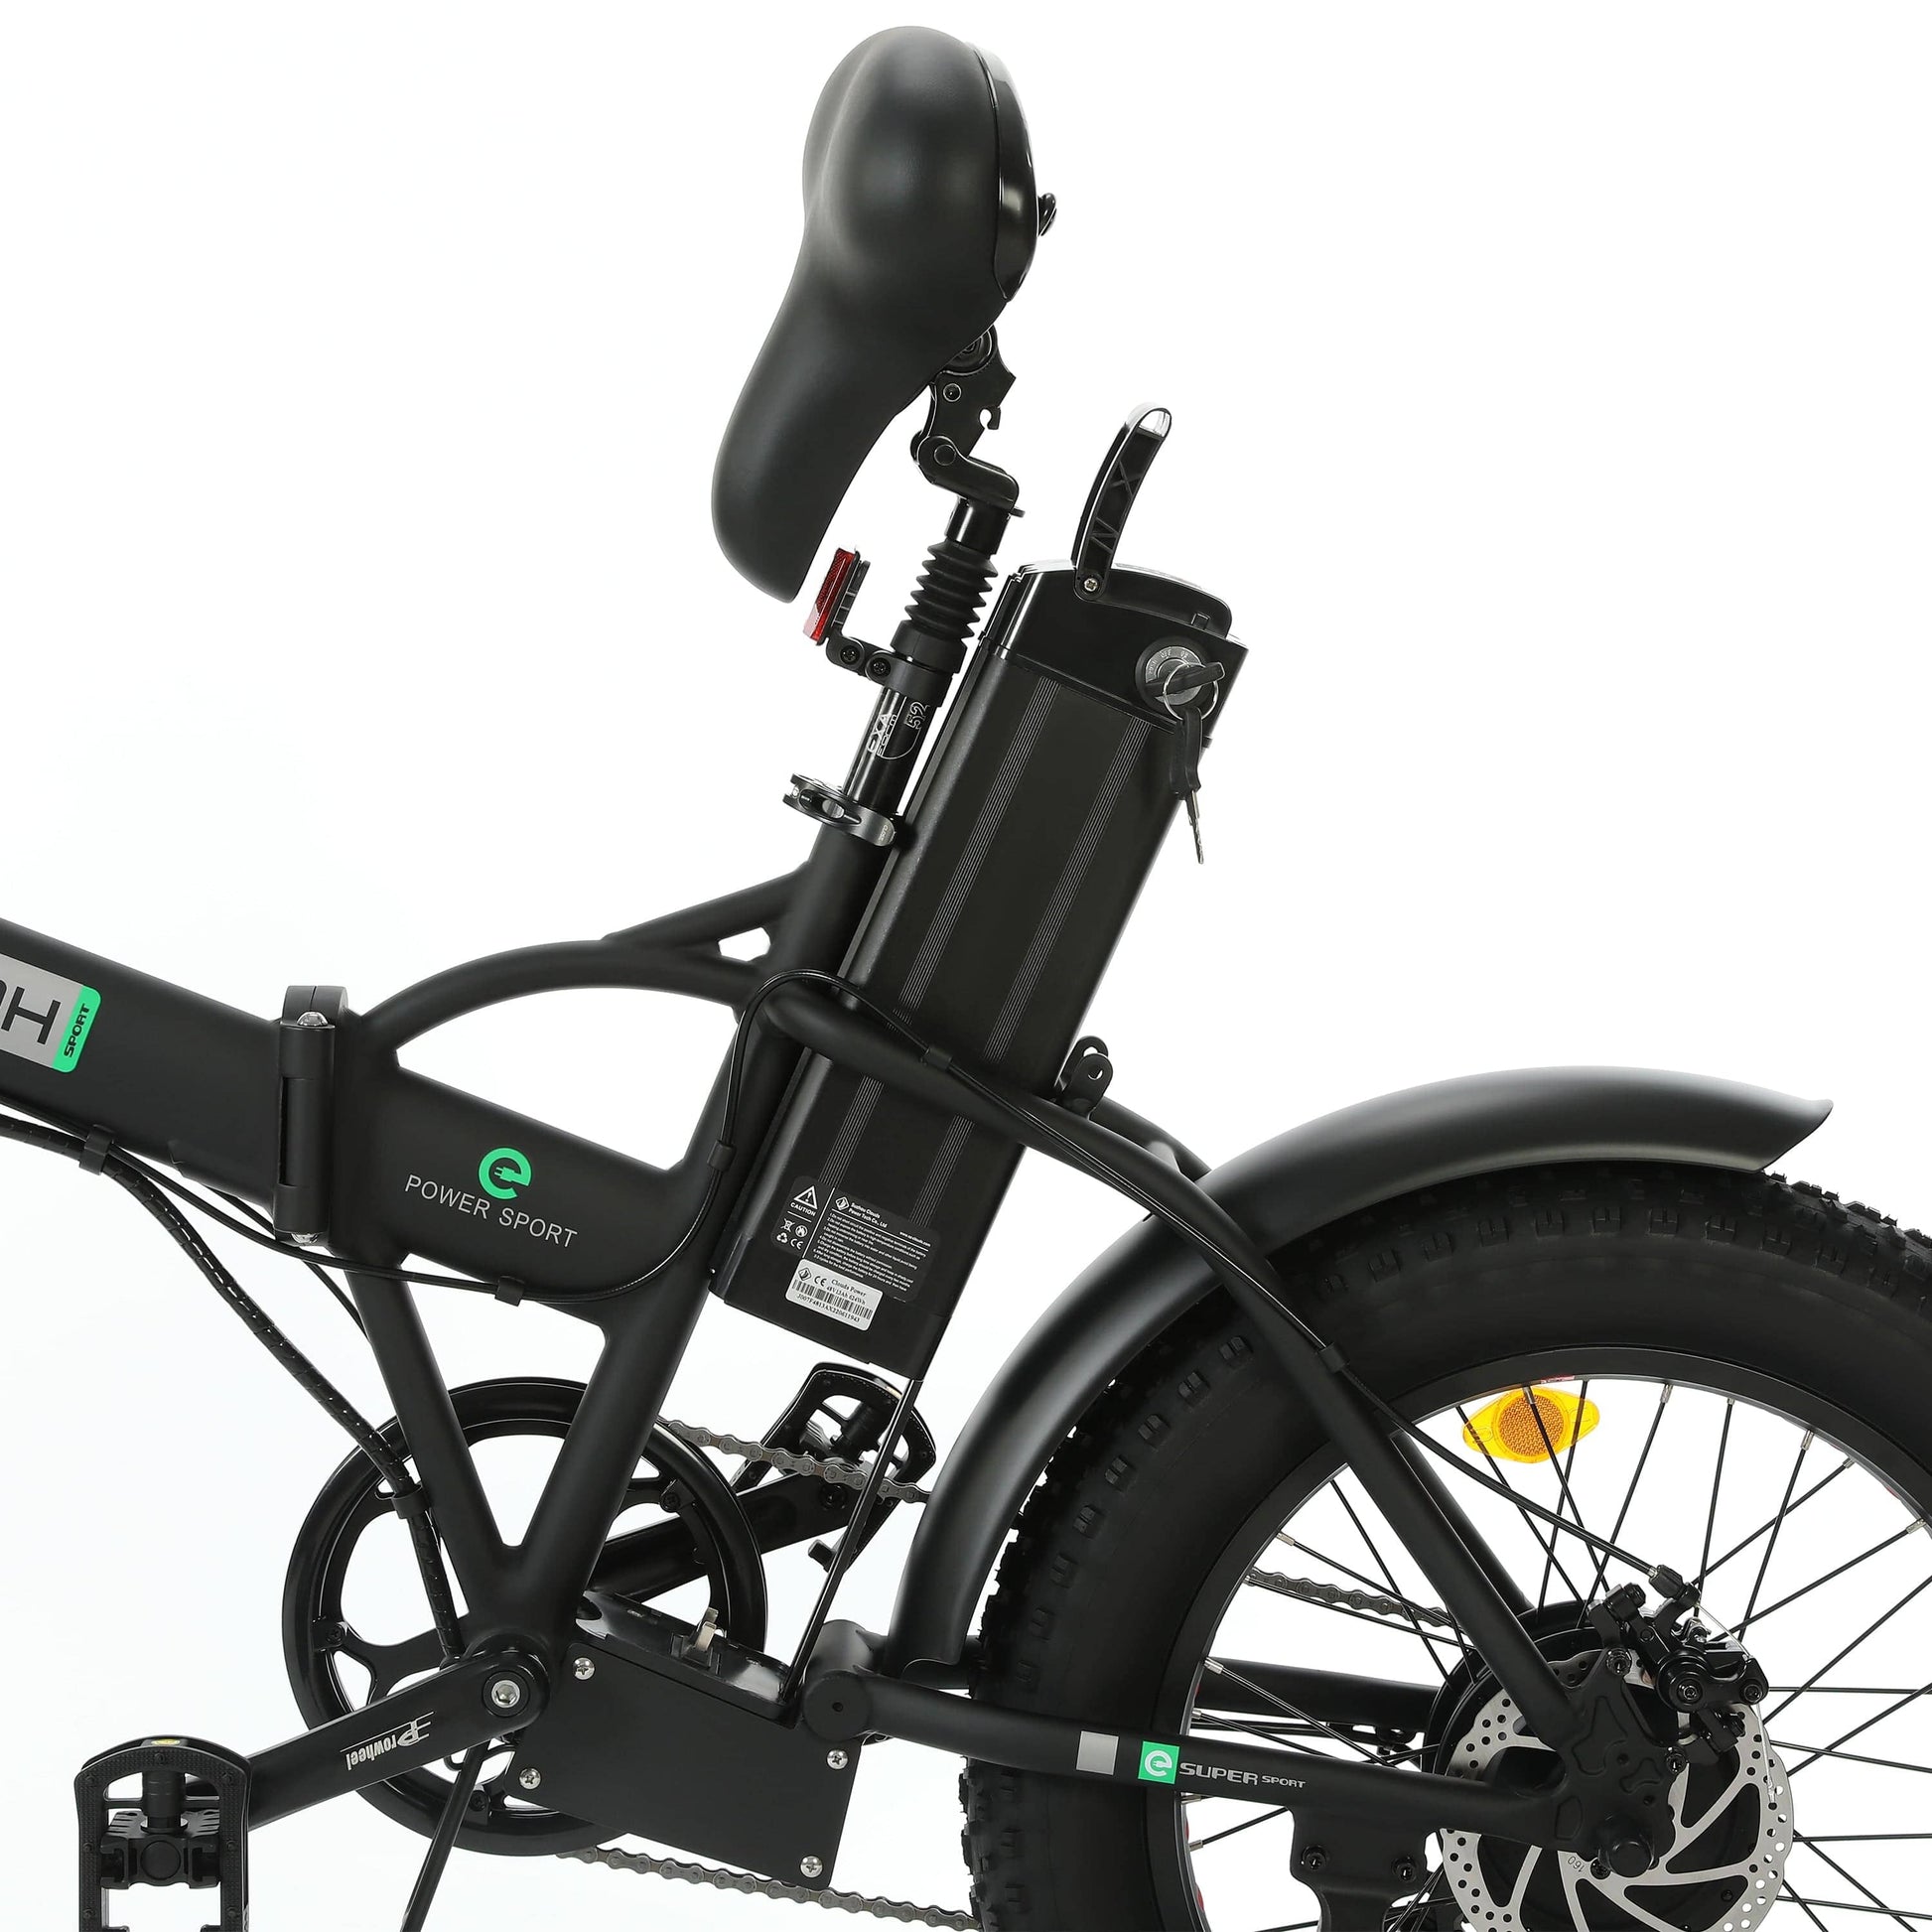 Ecotric ebikes Ecotric Matt Black 48V portable and folding fat ebike with LCD display